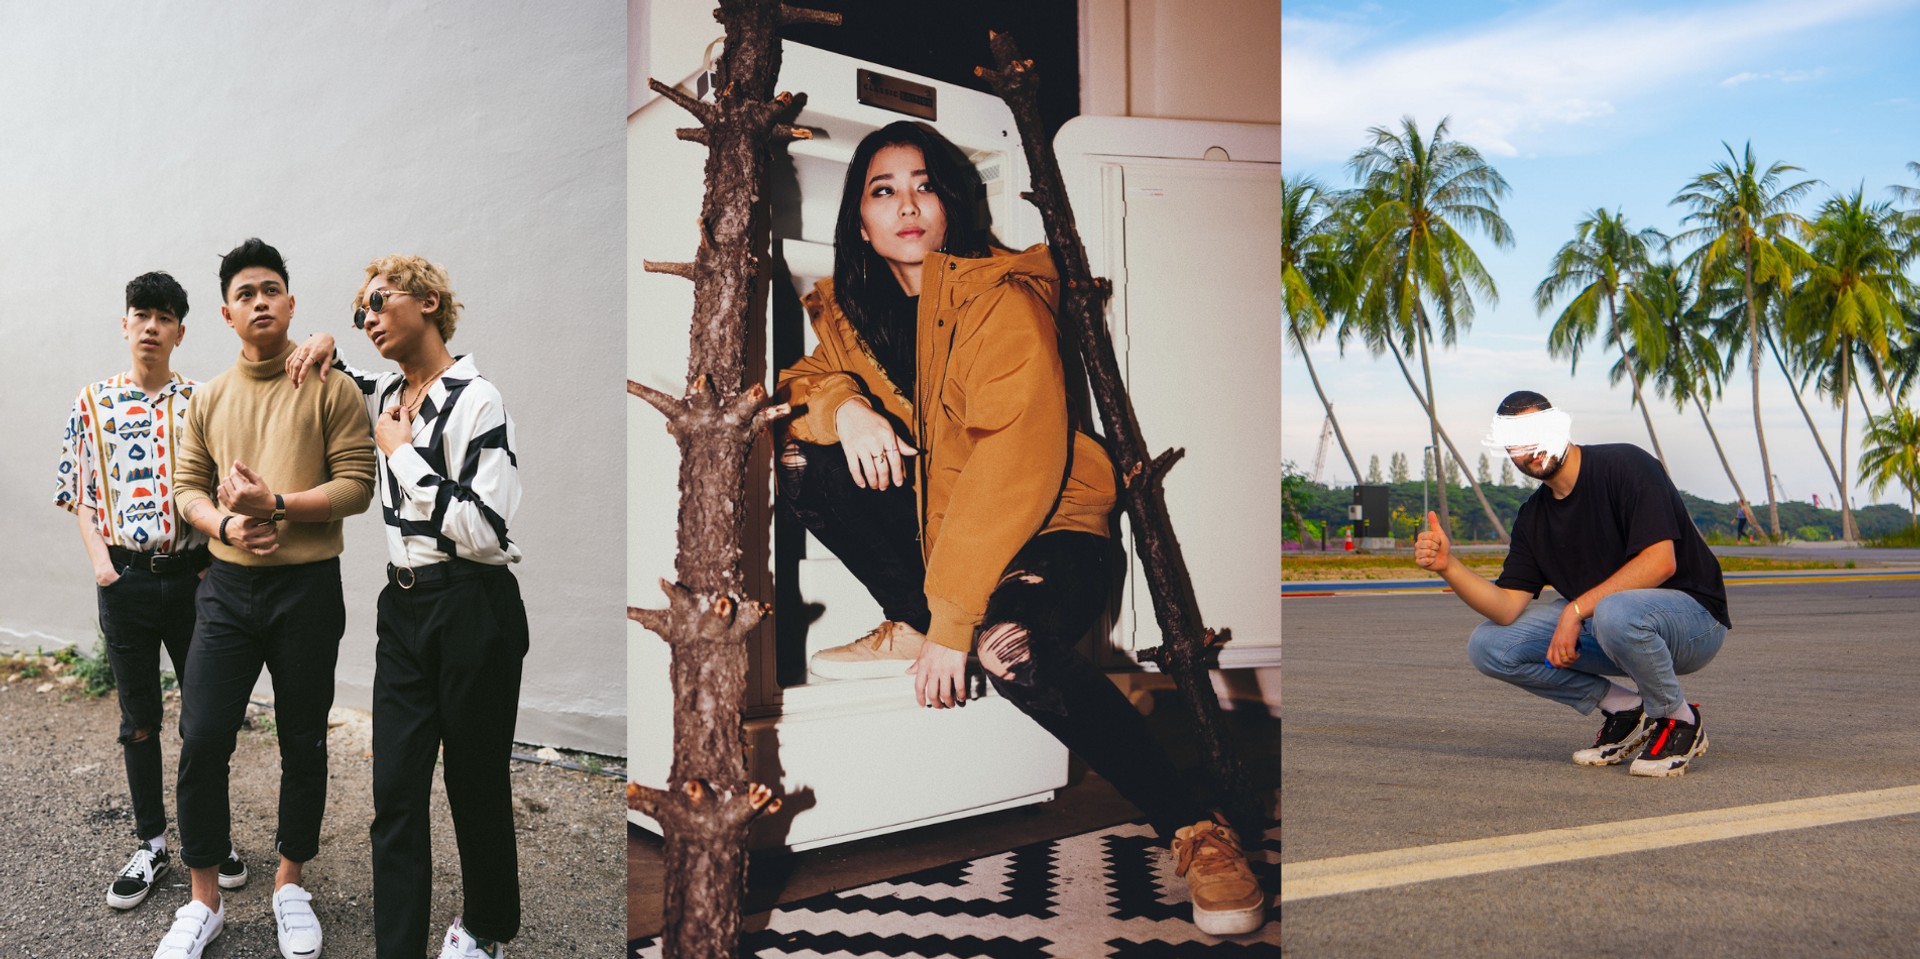 brb., Duumu, and Elsa Mickayla to perform at debut edition of Life’s A Beach mini-festival, presented by Bandwagon and EBX Live!